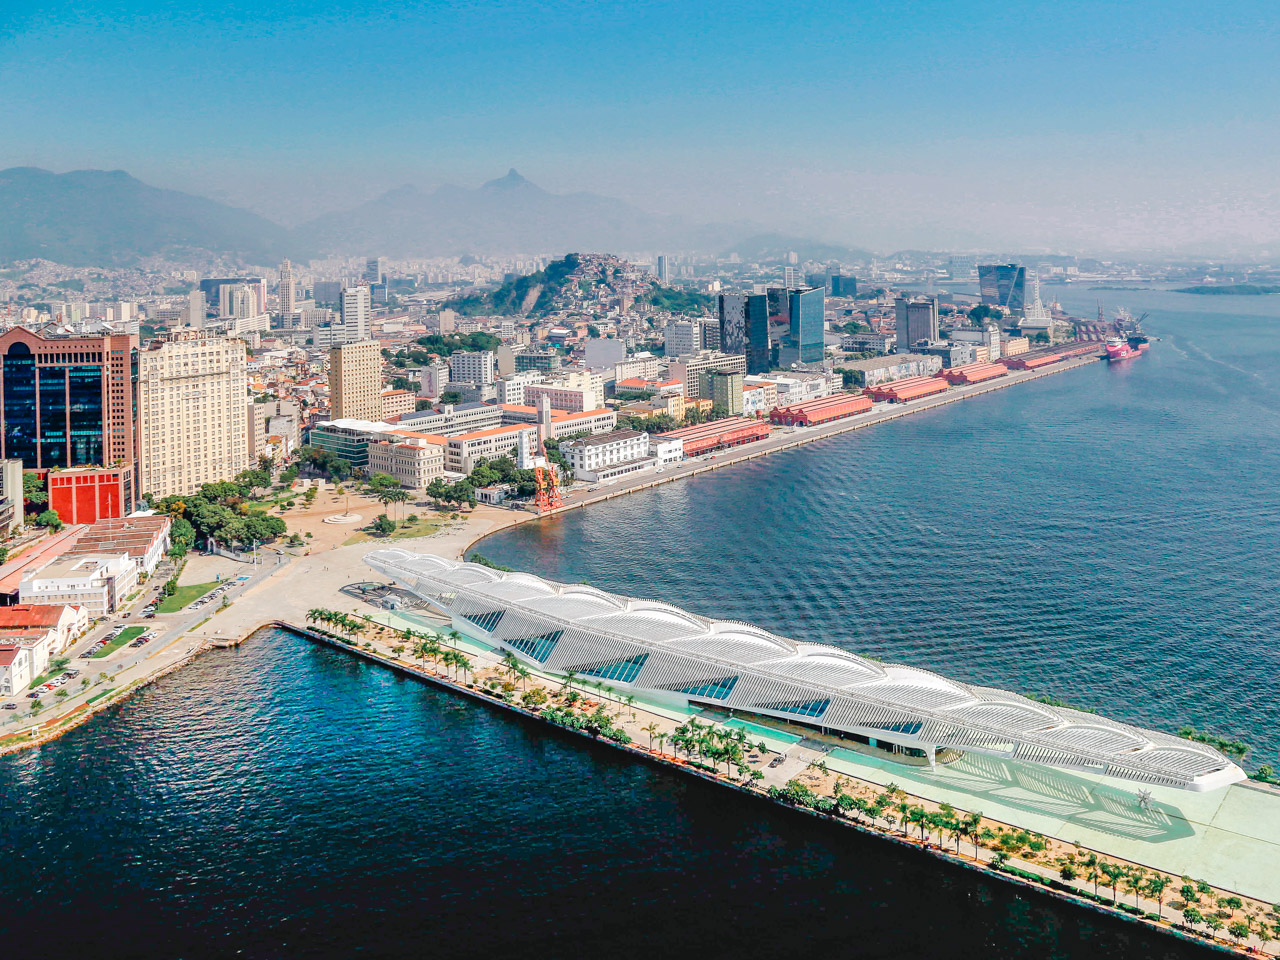 The rejuvenated waterfront of Rio de Janeiro with the Museum of Tomorrow in the foreground